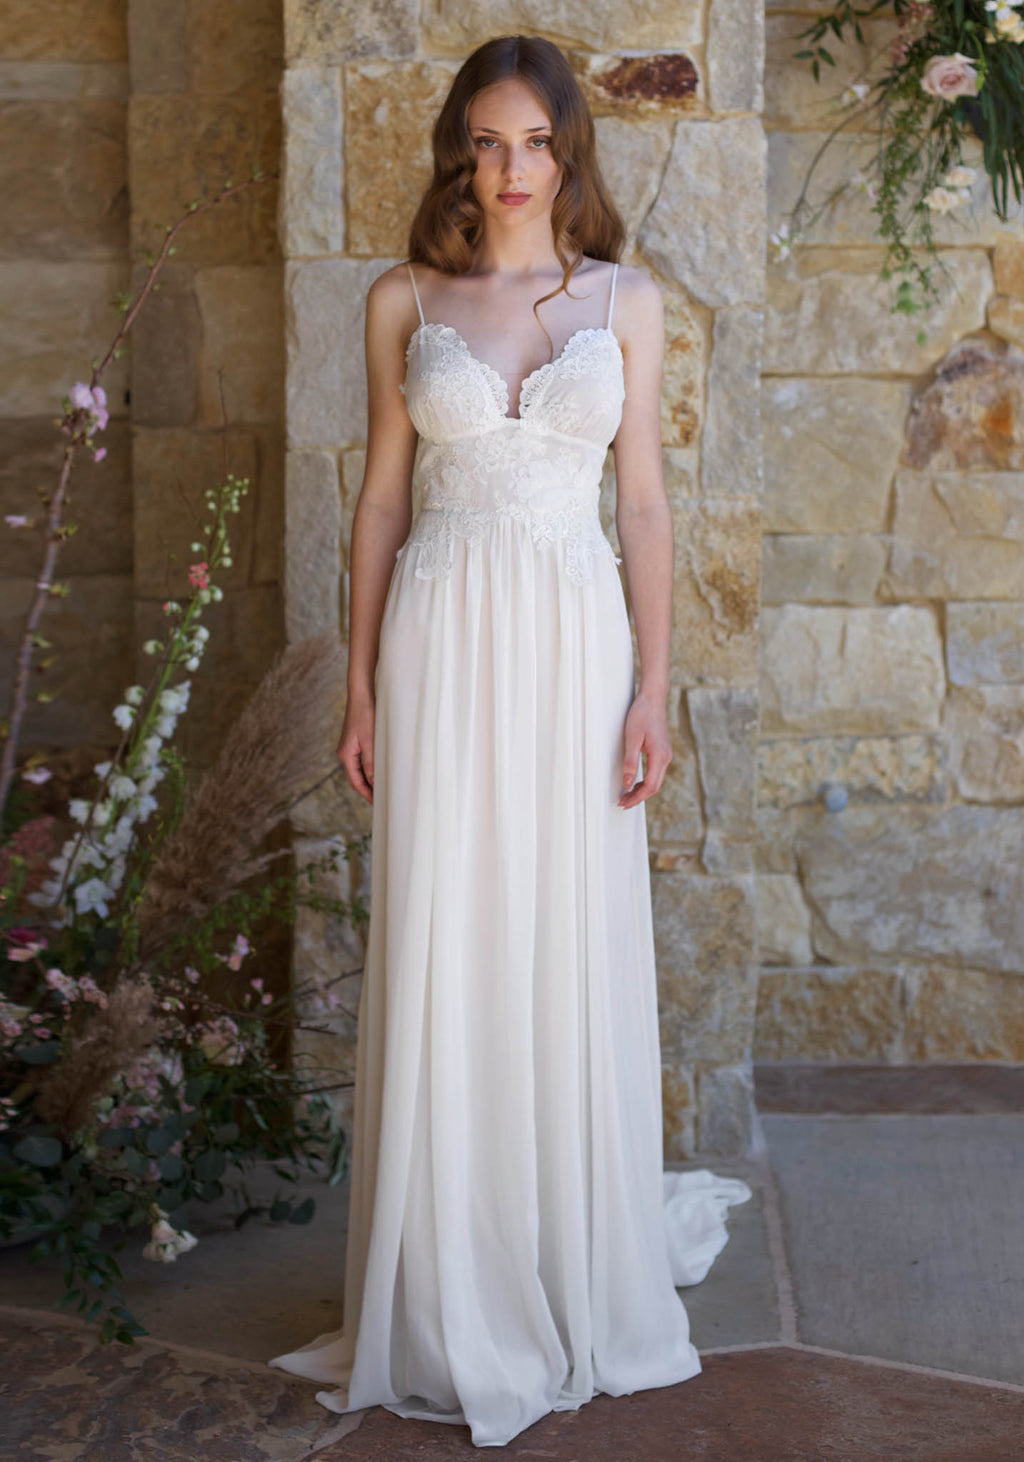 pairings: Claire Pettibone's Romantic Wedding Dream Gowns — Justine M  Couture Bridal Veils, Jewelry and Accessories